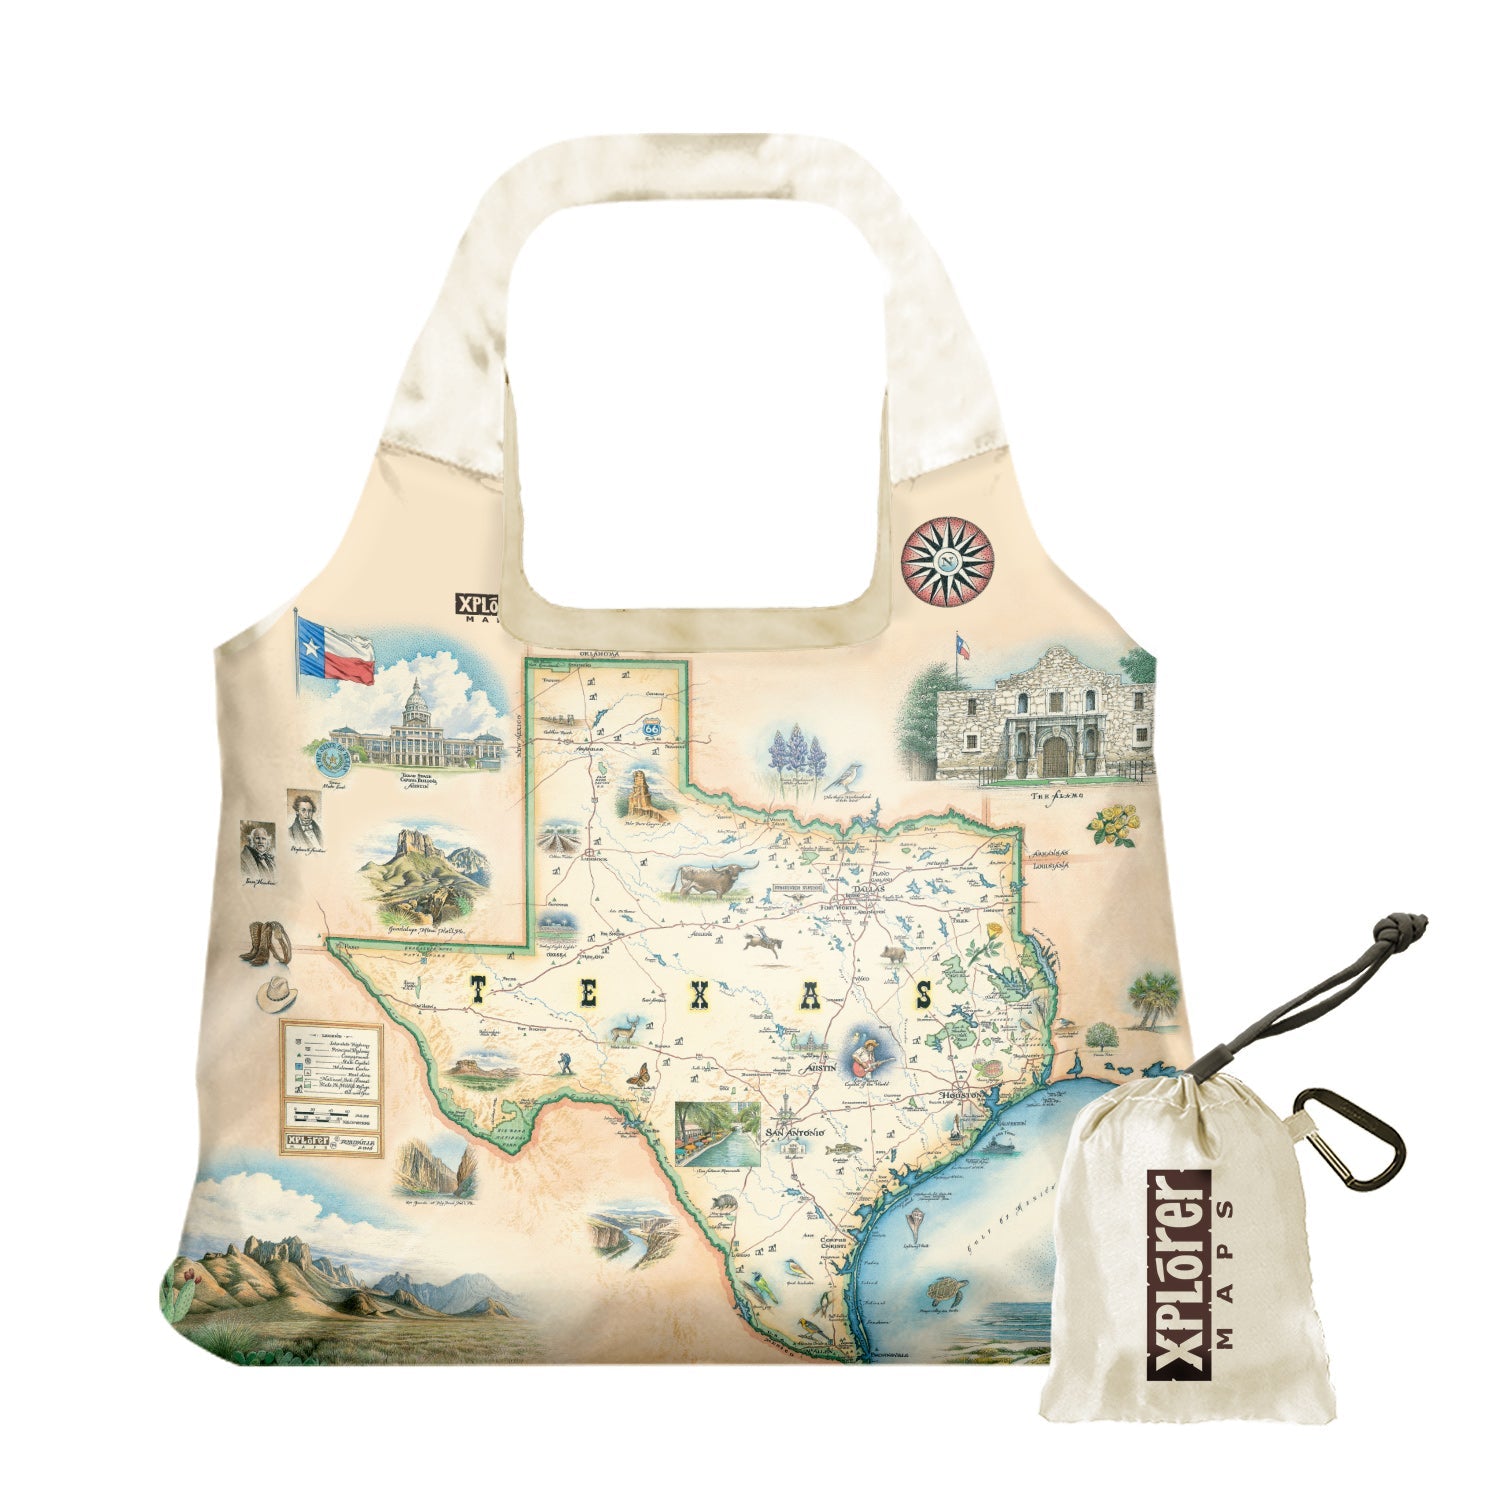 Texas State Map Pouch Tote Bags by Xplorer Maps. The map features illustrations of places such as the Alamo, San Antonio Riverwalk, and Guadalupe National Park. Flora and fauna include Venus flytraps, longhorns, Monarch butterflies, and armadillos.